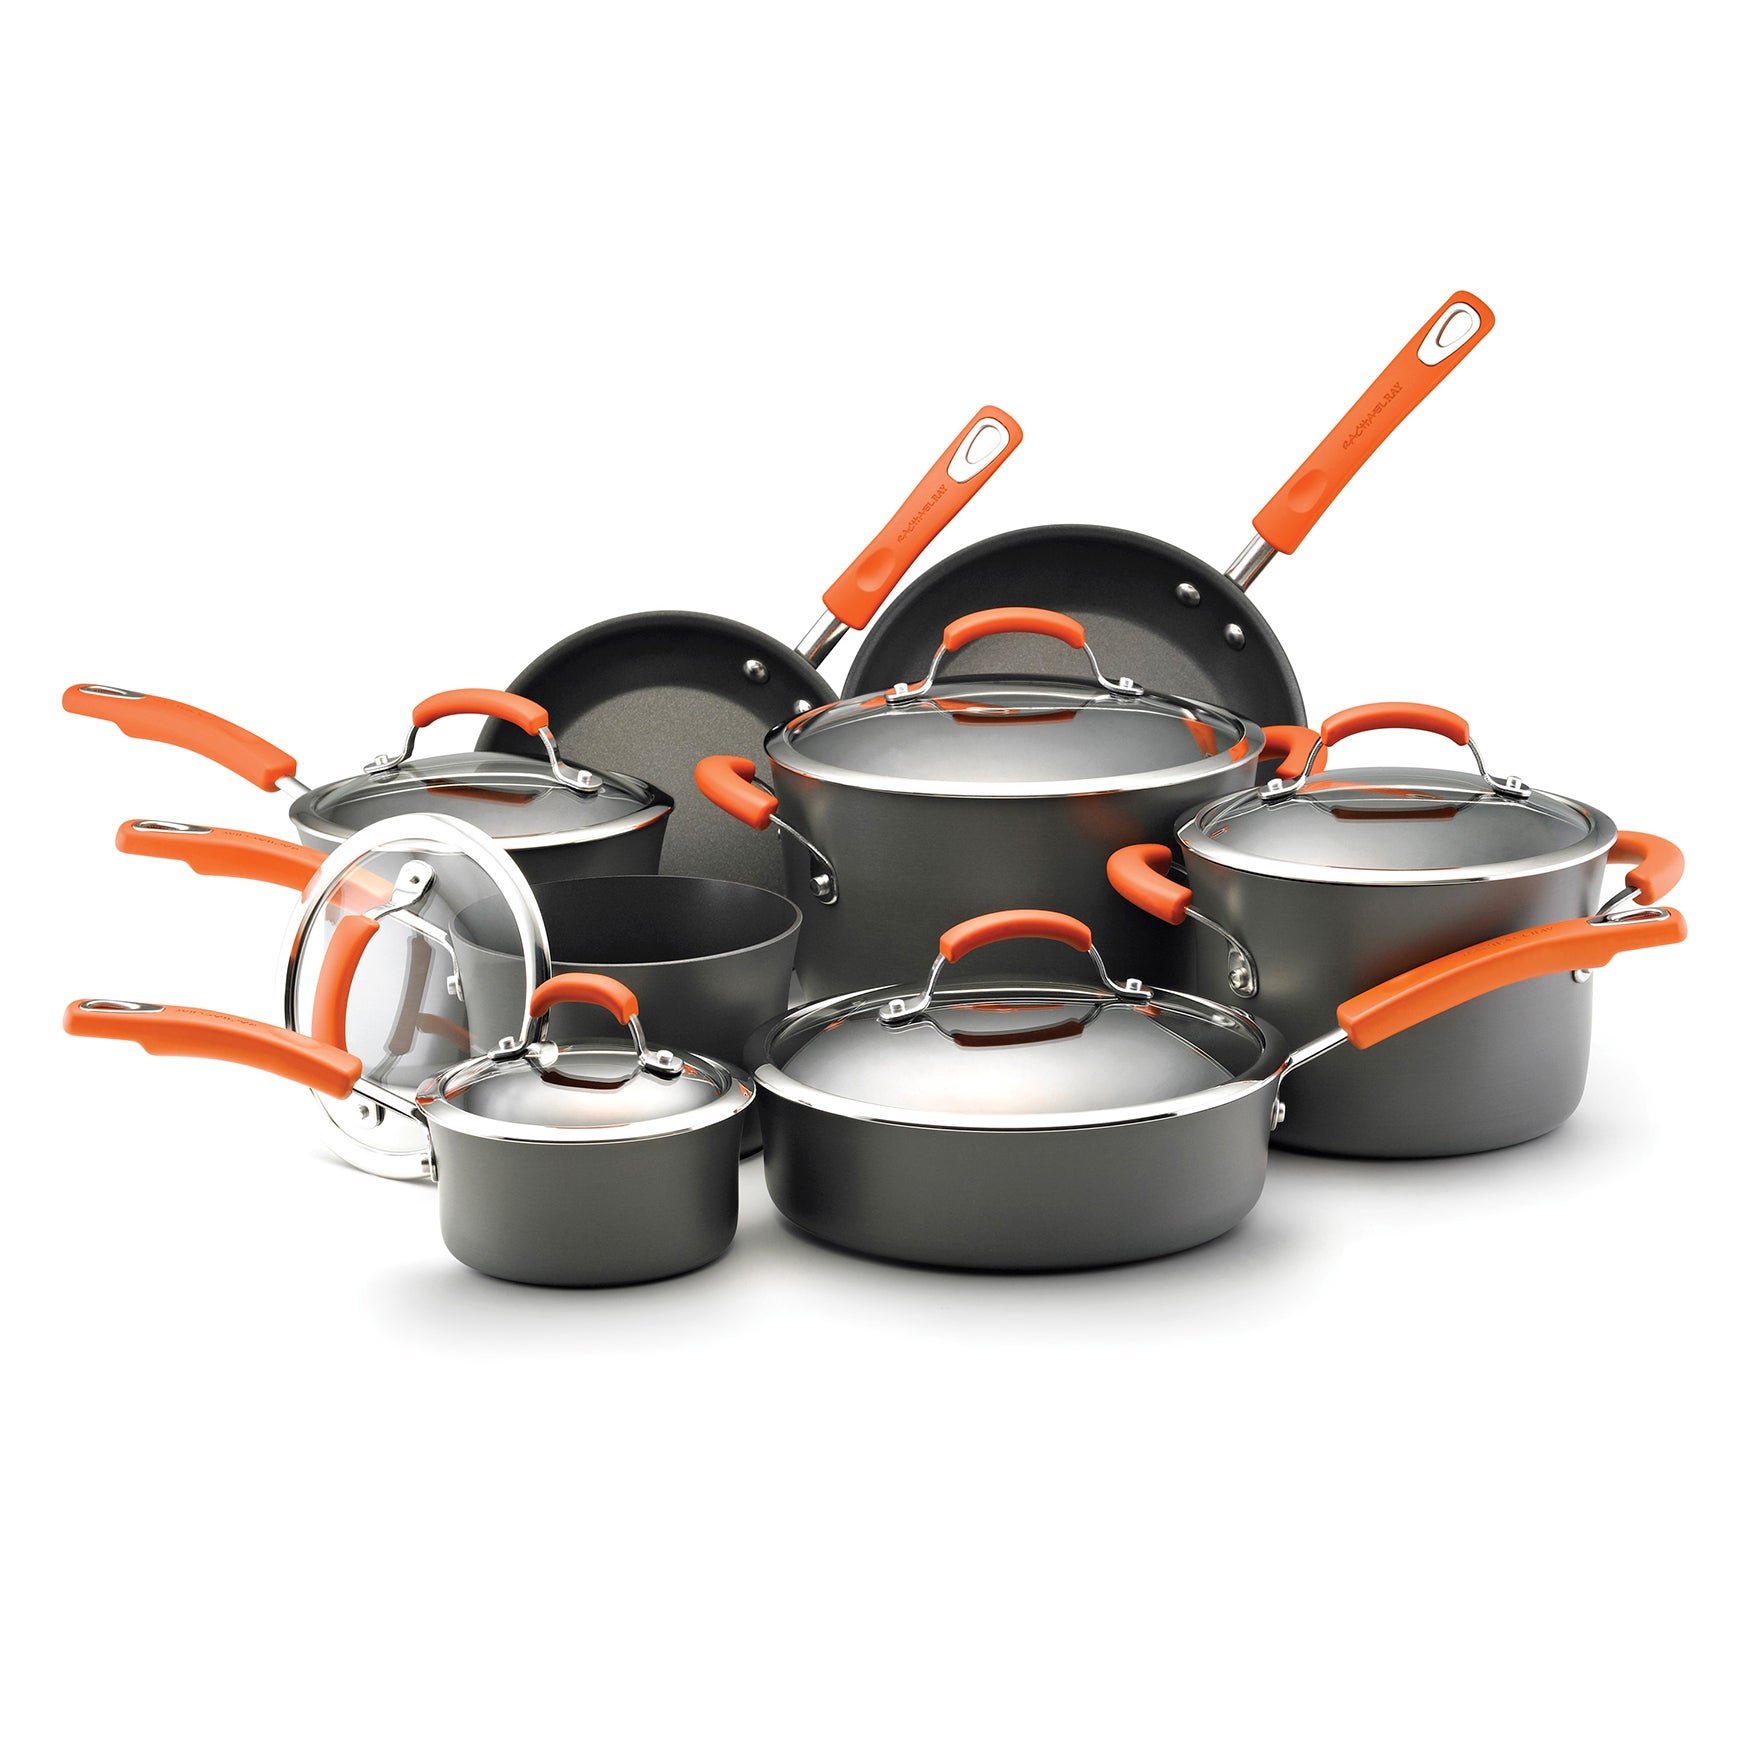 Rachael Ray 10 Pc ﻿Hard Anodized II Cookware Set in the